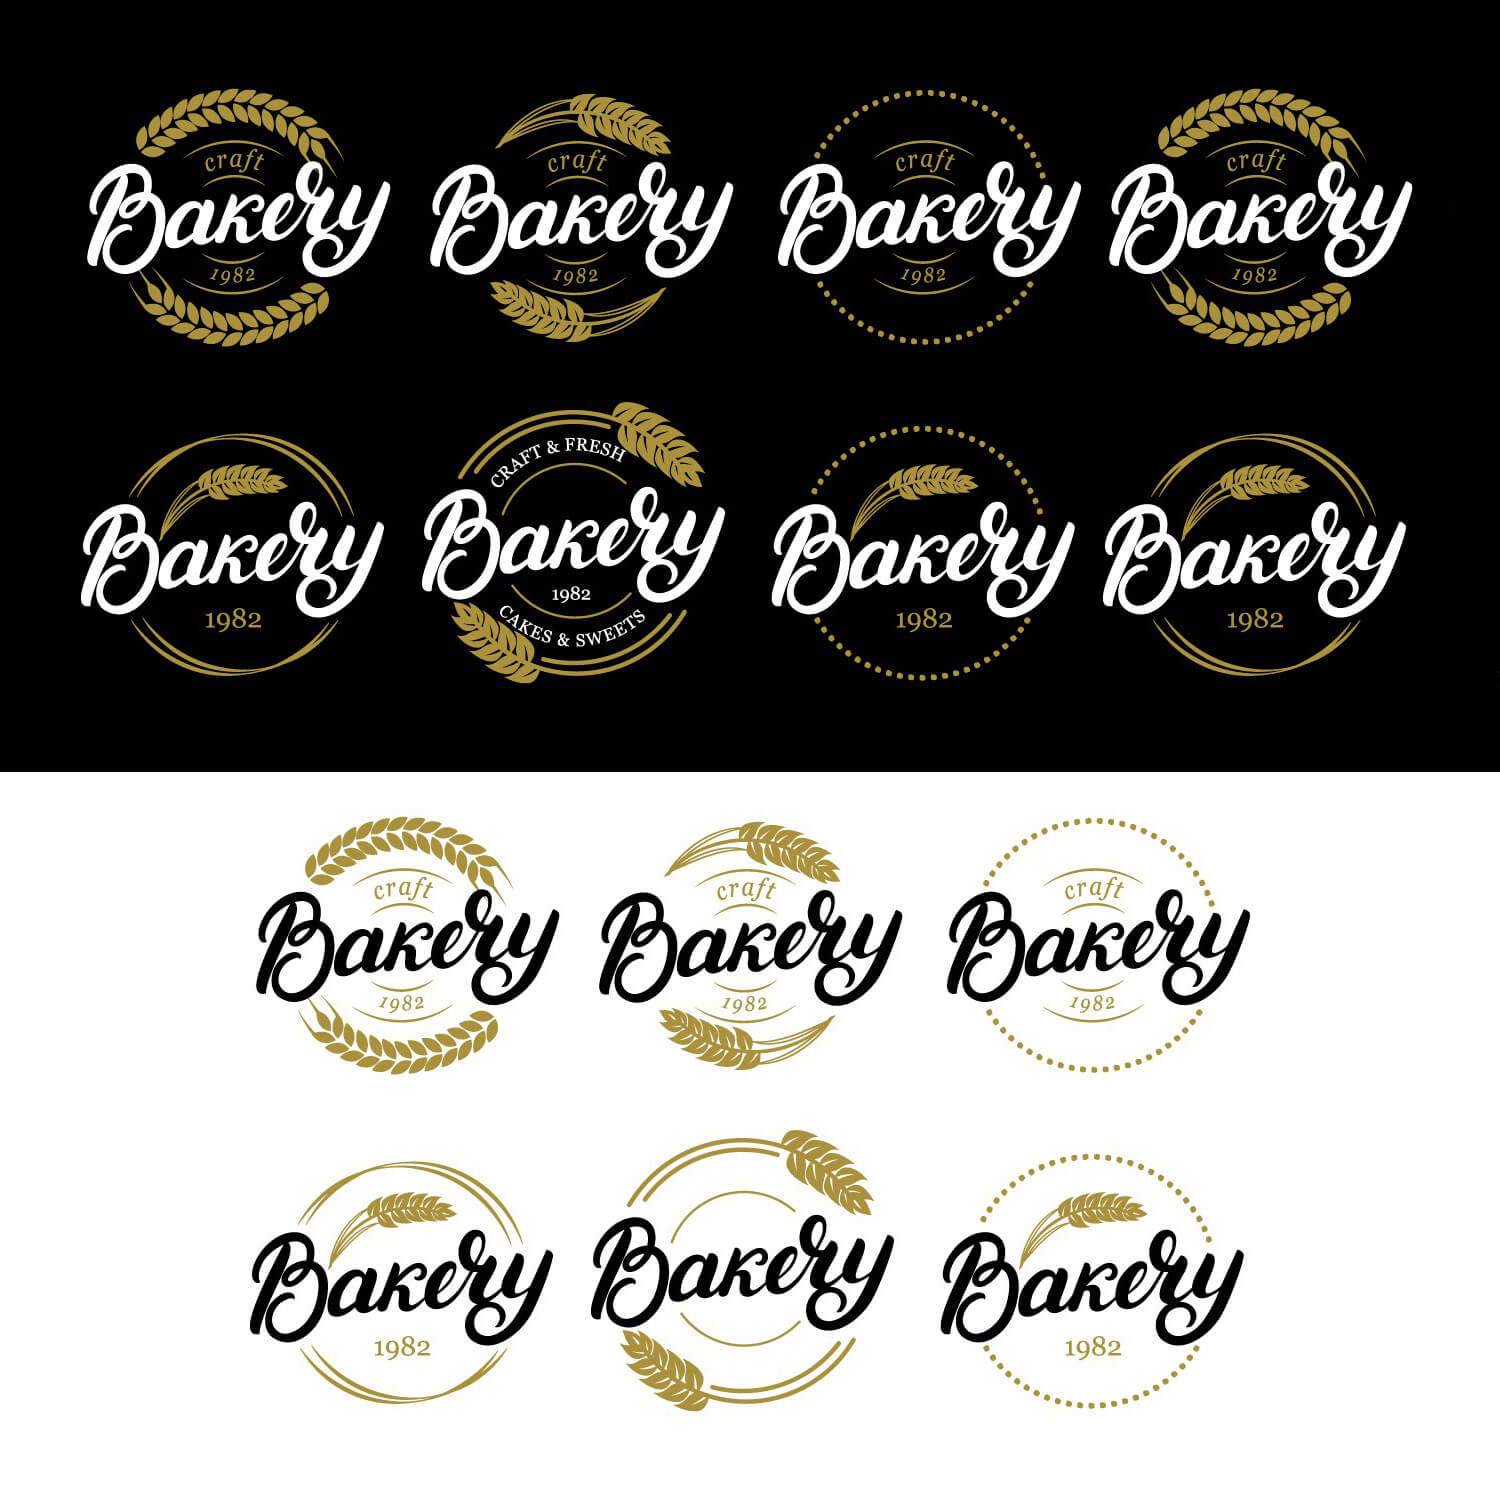 Two versions of the "Bakery" logos on white and black backgrounds.